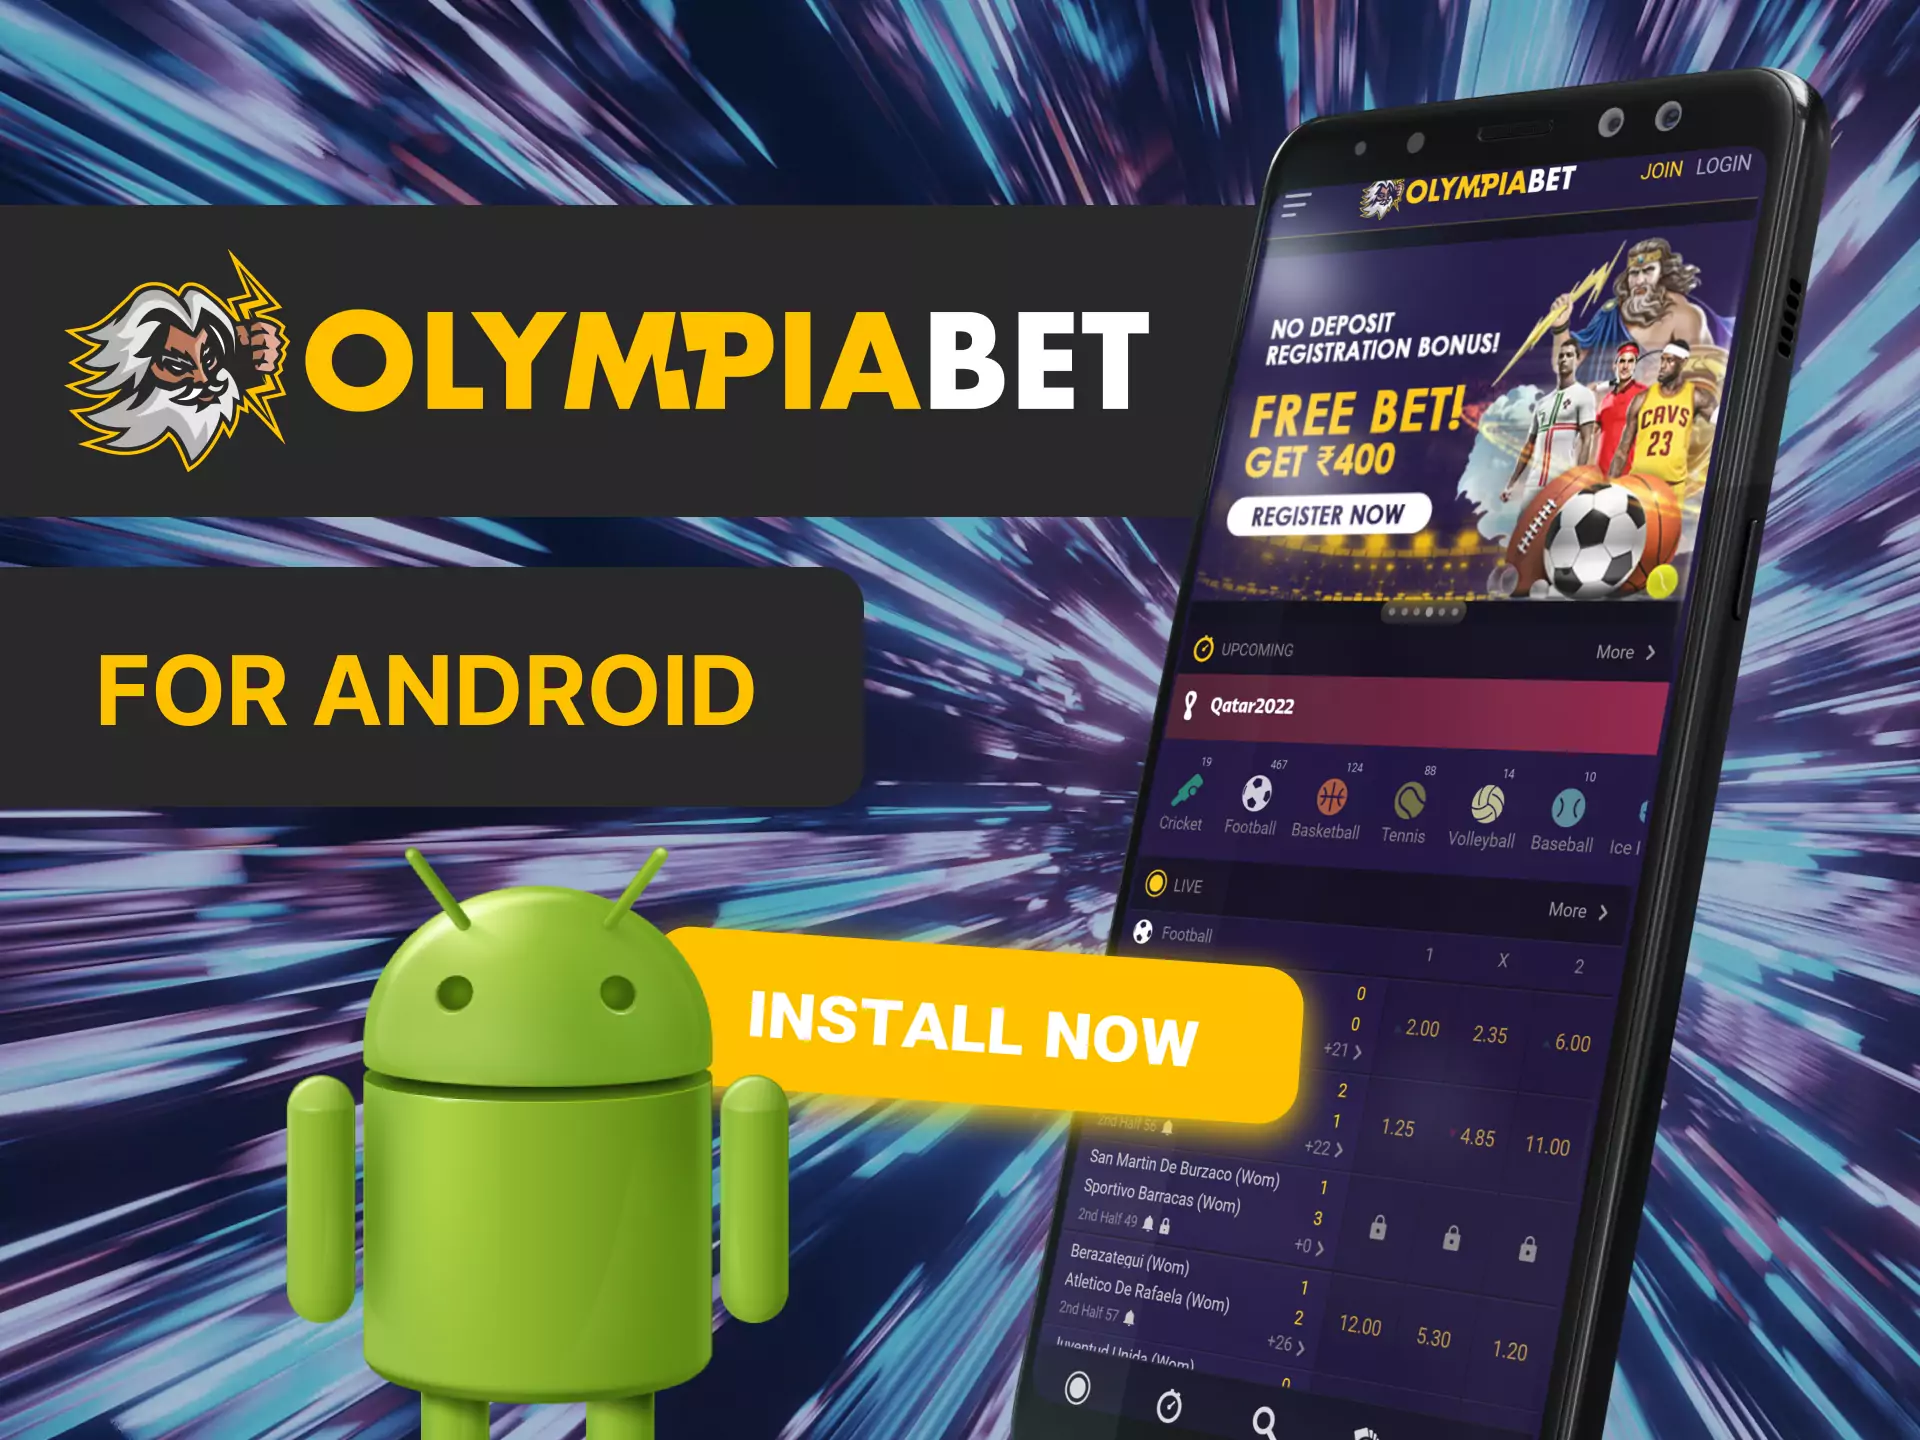 You can use the OlympiaBet app on your Android device.